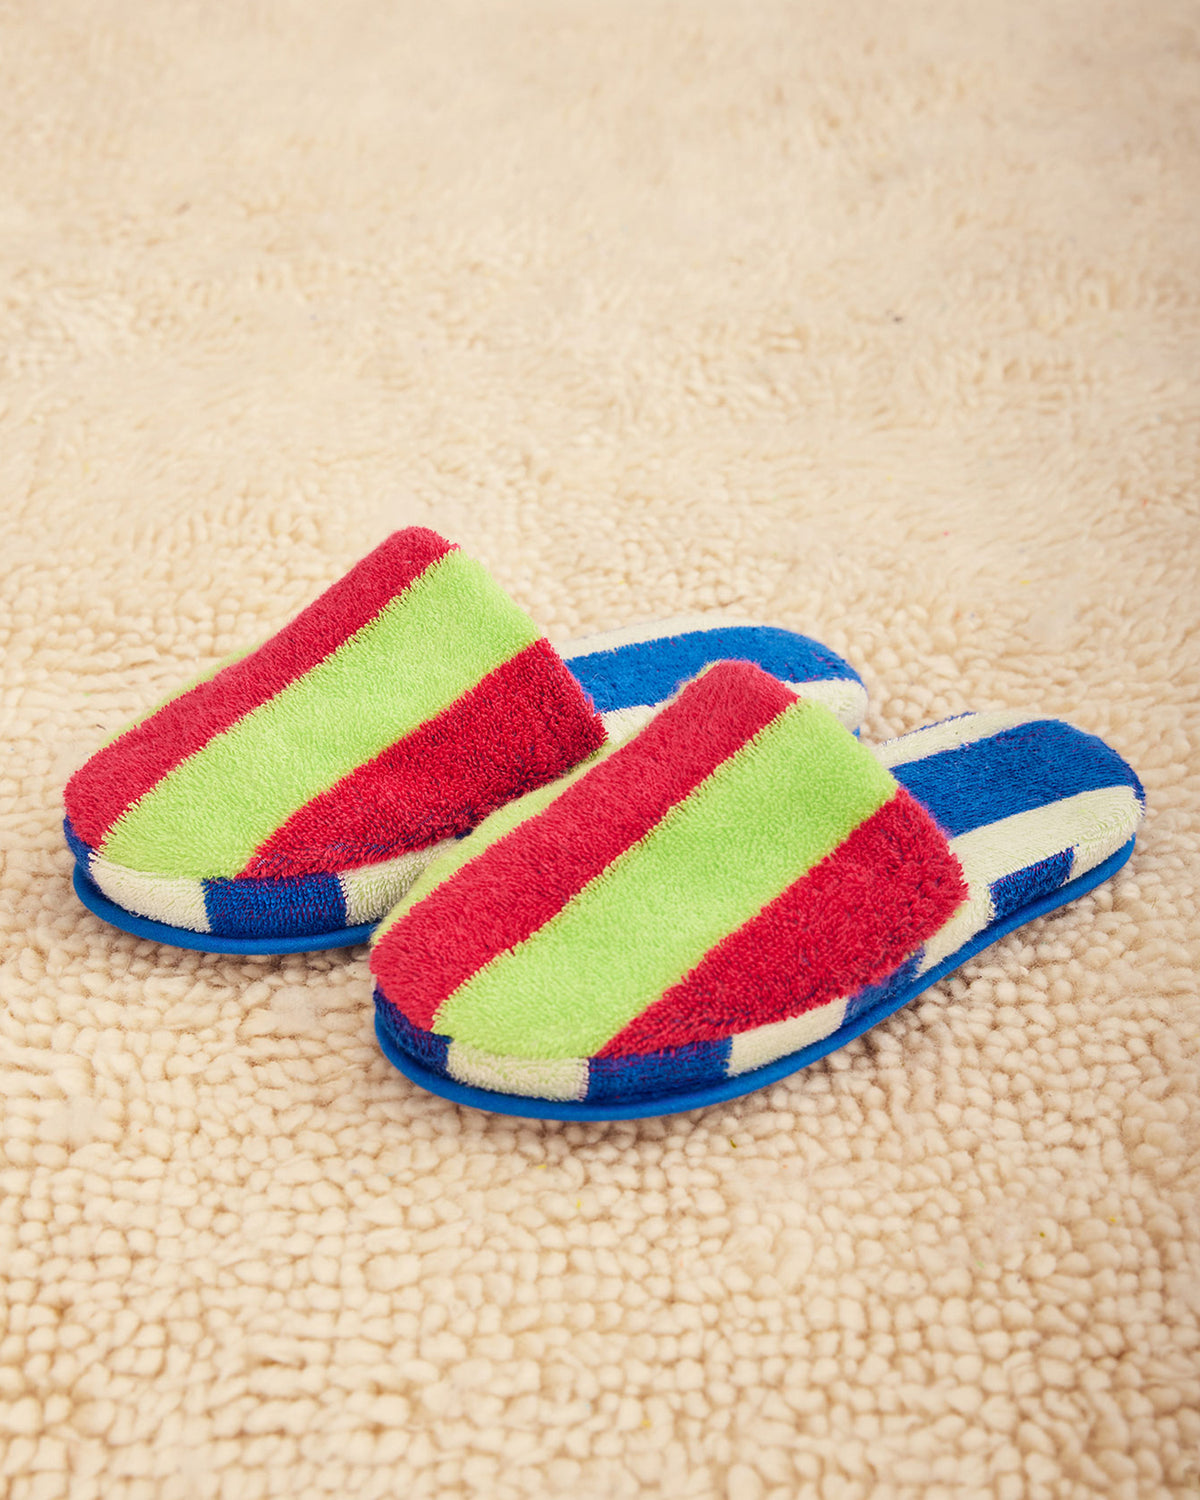 Dusen Dusen Stripe Slippers in Garden. Contrasting stripes and colorways on the outer shell and plush inner sole. 95% Cotton, 450gsm and 5% Polyamide/Nomex/Meryl. This item is Oeko-Tex Standard 100 certified (no harmful chemicals were used during production). Made in Portugal.